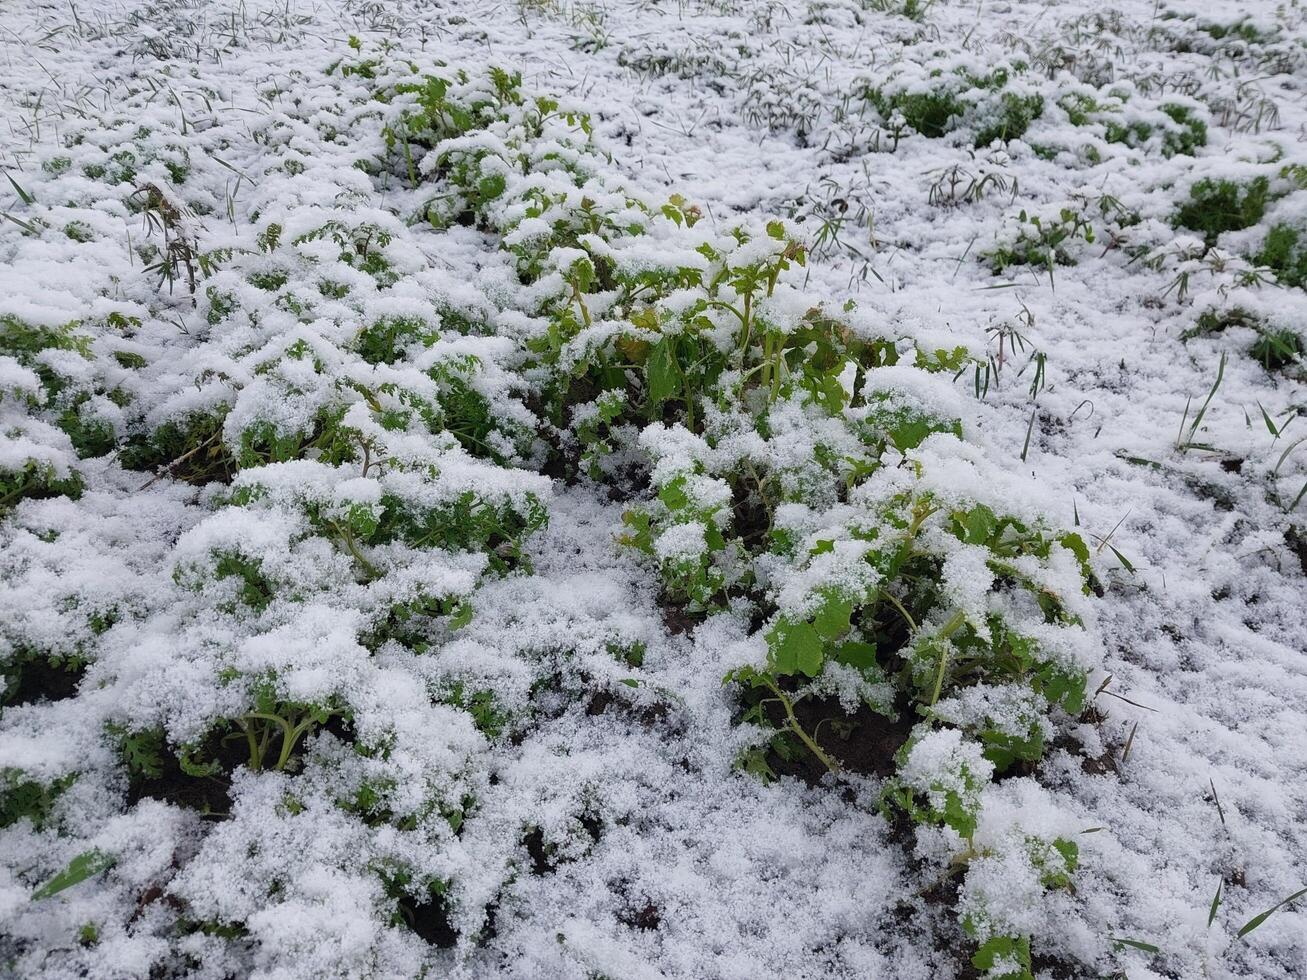 Snow fell on the garden where vegetables grow in the village photo